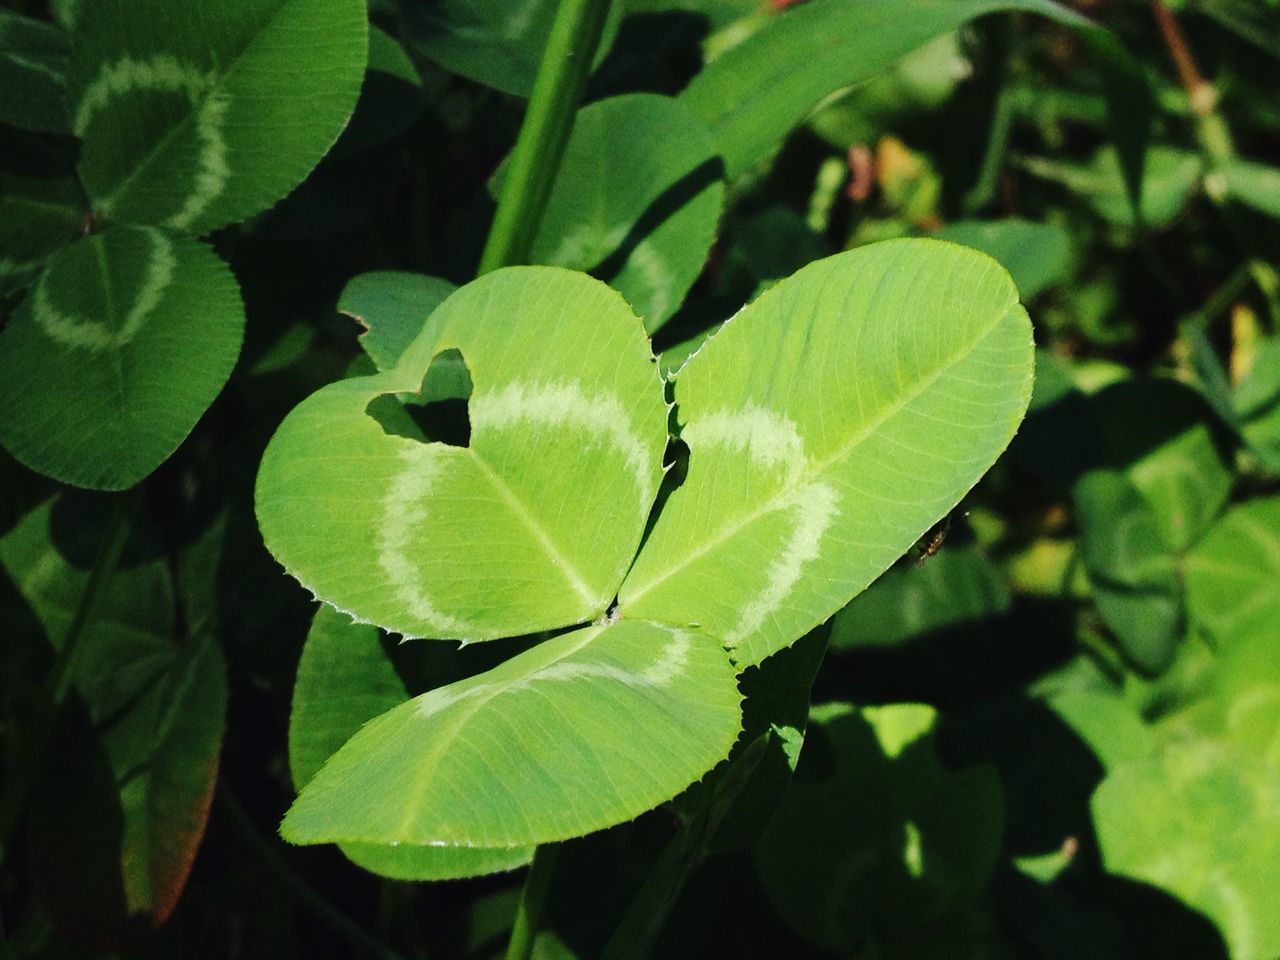 leaf, green color, growth, leaf vein, plant, close-up, nature, leaves, focus on foreground, beauty in nature, green, natural pattern, no people, day, sunlight, outdoors, freshness, tranquility, botany, high angle view